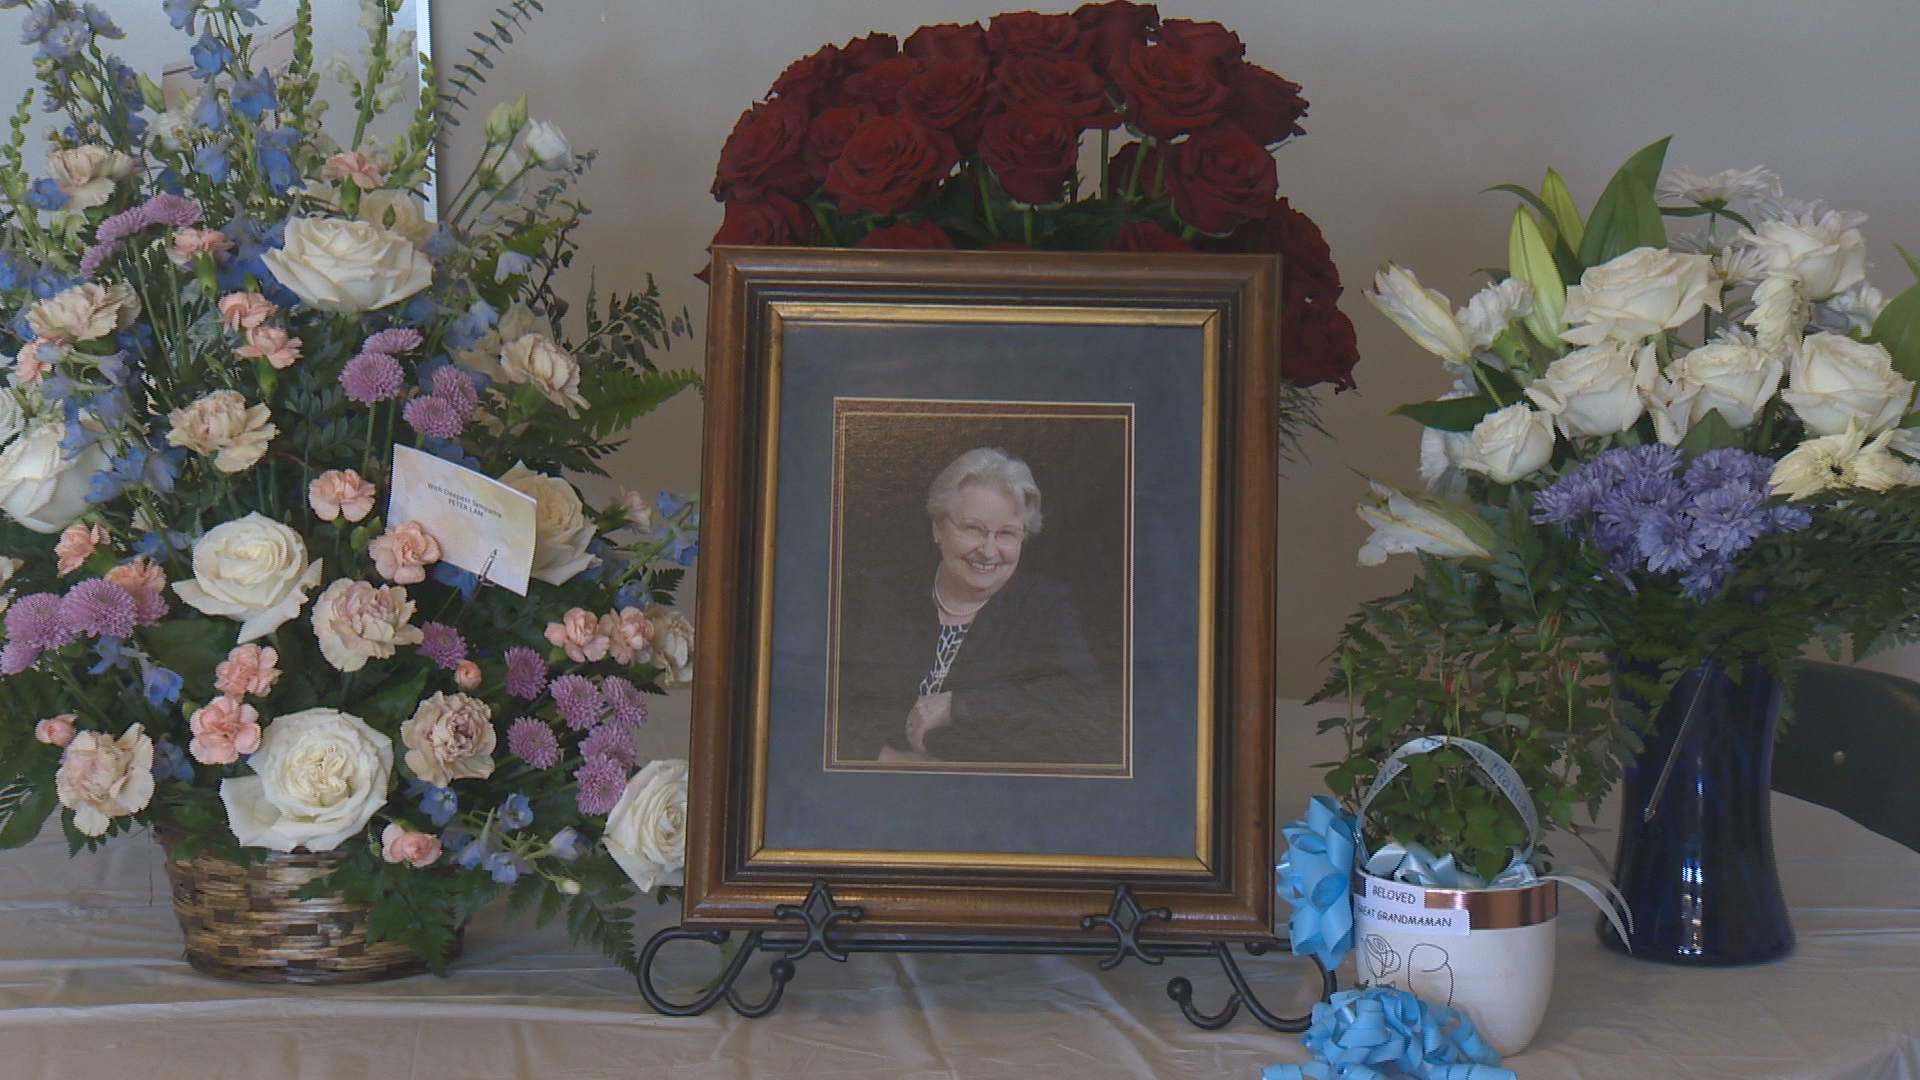 Winnipeg community honors legacy of Evelyne Reese, former city councillor